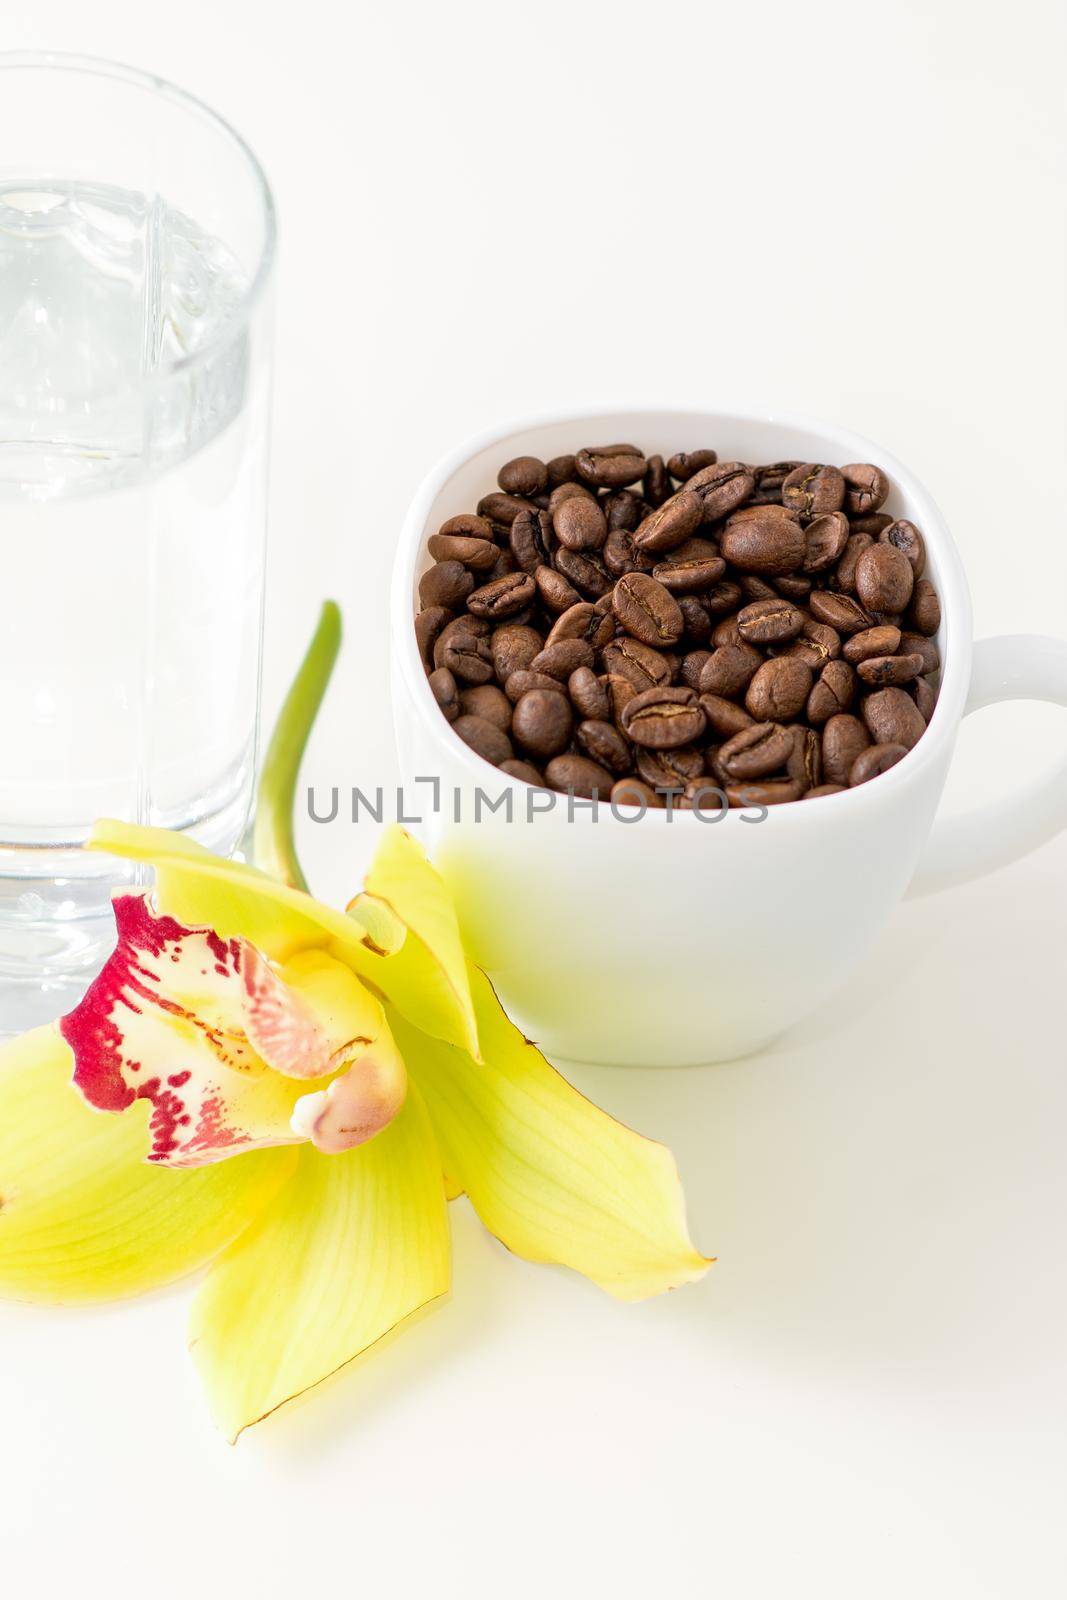 Cup of coffee beans and glass of water with yellow orchid flower against a white background. by okskukuruza